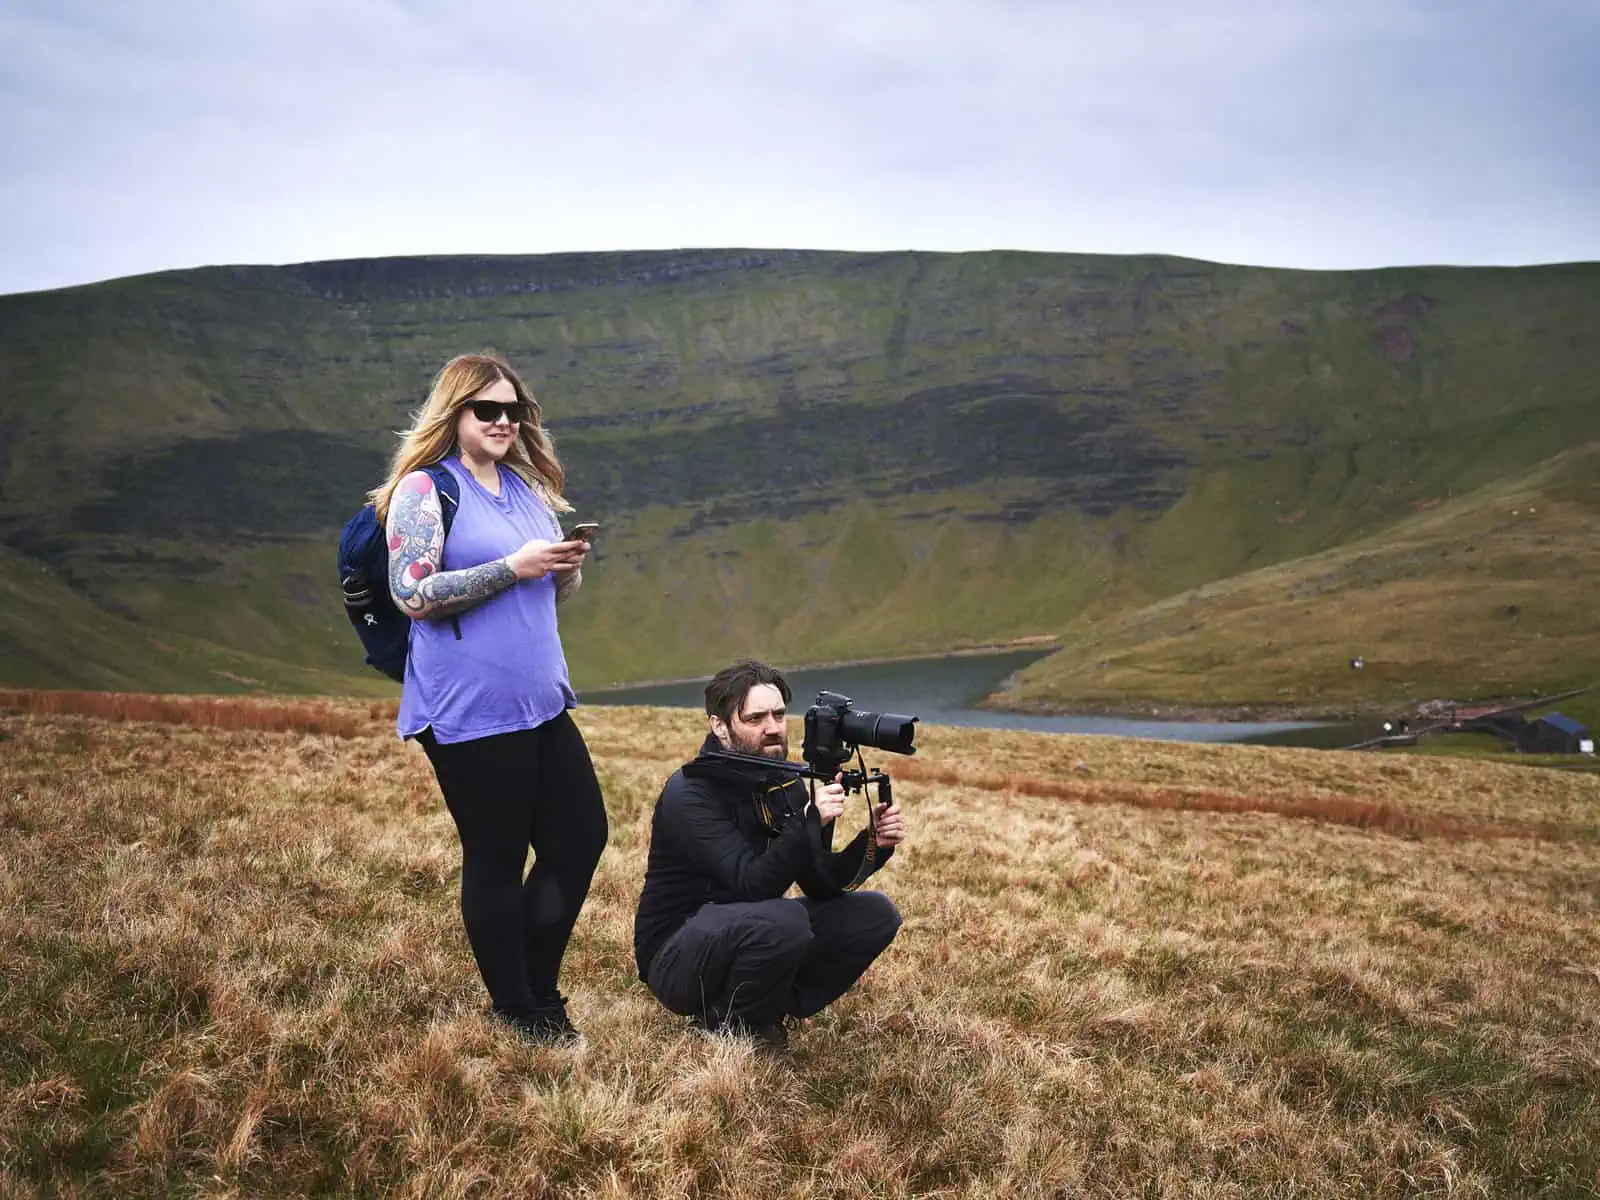 ID: Fay and Matt are close to each other in the centre of this landscape image. Fay stands to the left, wearing purple top and black trousers with blue bag. Fay holds a phone and is logging shots as they shoot a video. Matt is crouched down, wearing a black coat, black trousers and is holding a camera on a shoulder rig. They are stood on the top of a hill, which is brown and grassy. In the background are higher, green mountains and a lake underneath.